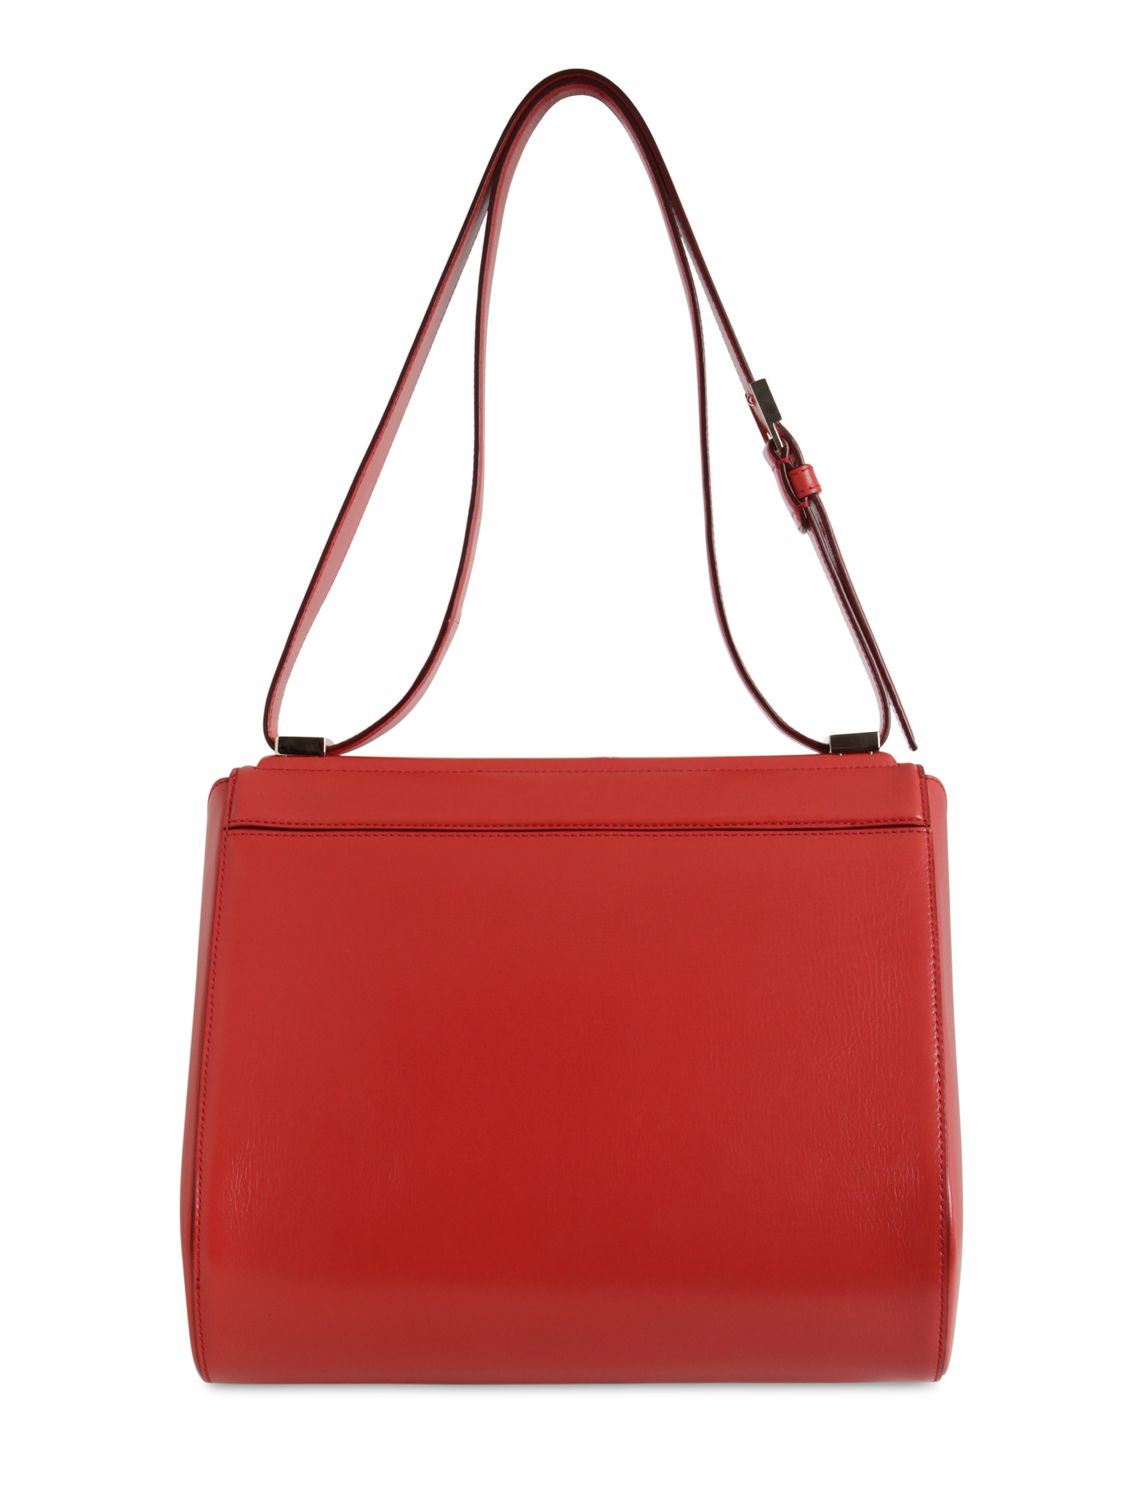 Lyst - Givenchy Pandora Box Textured Leather Bag in Red